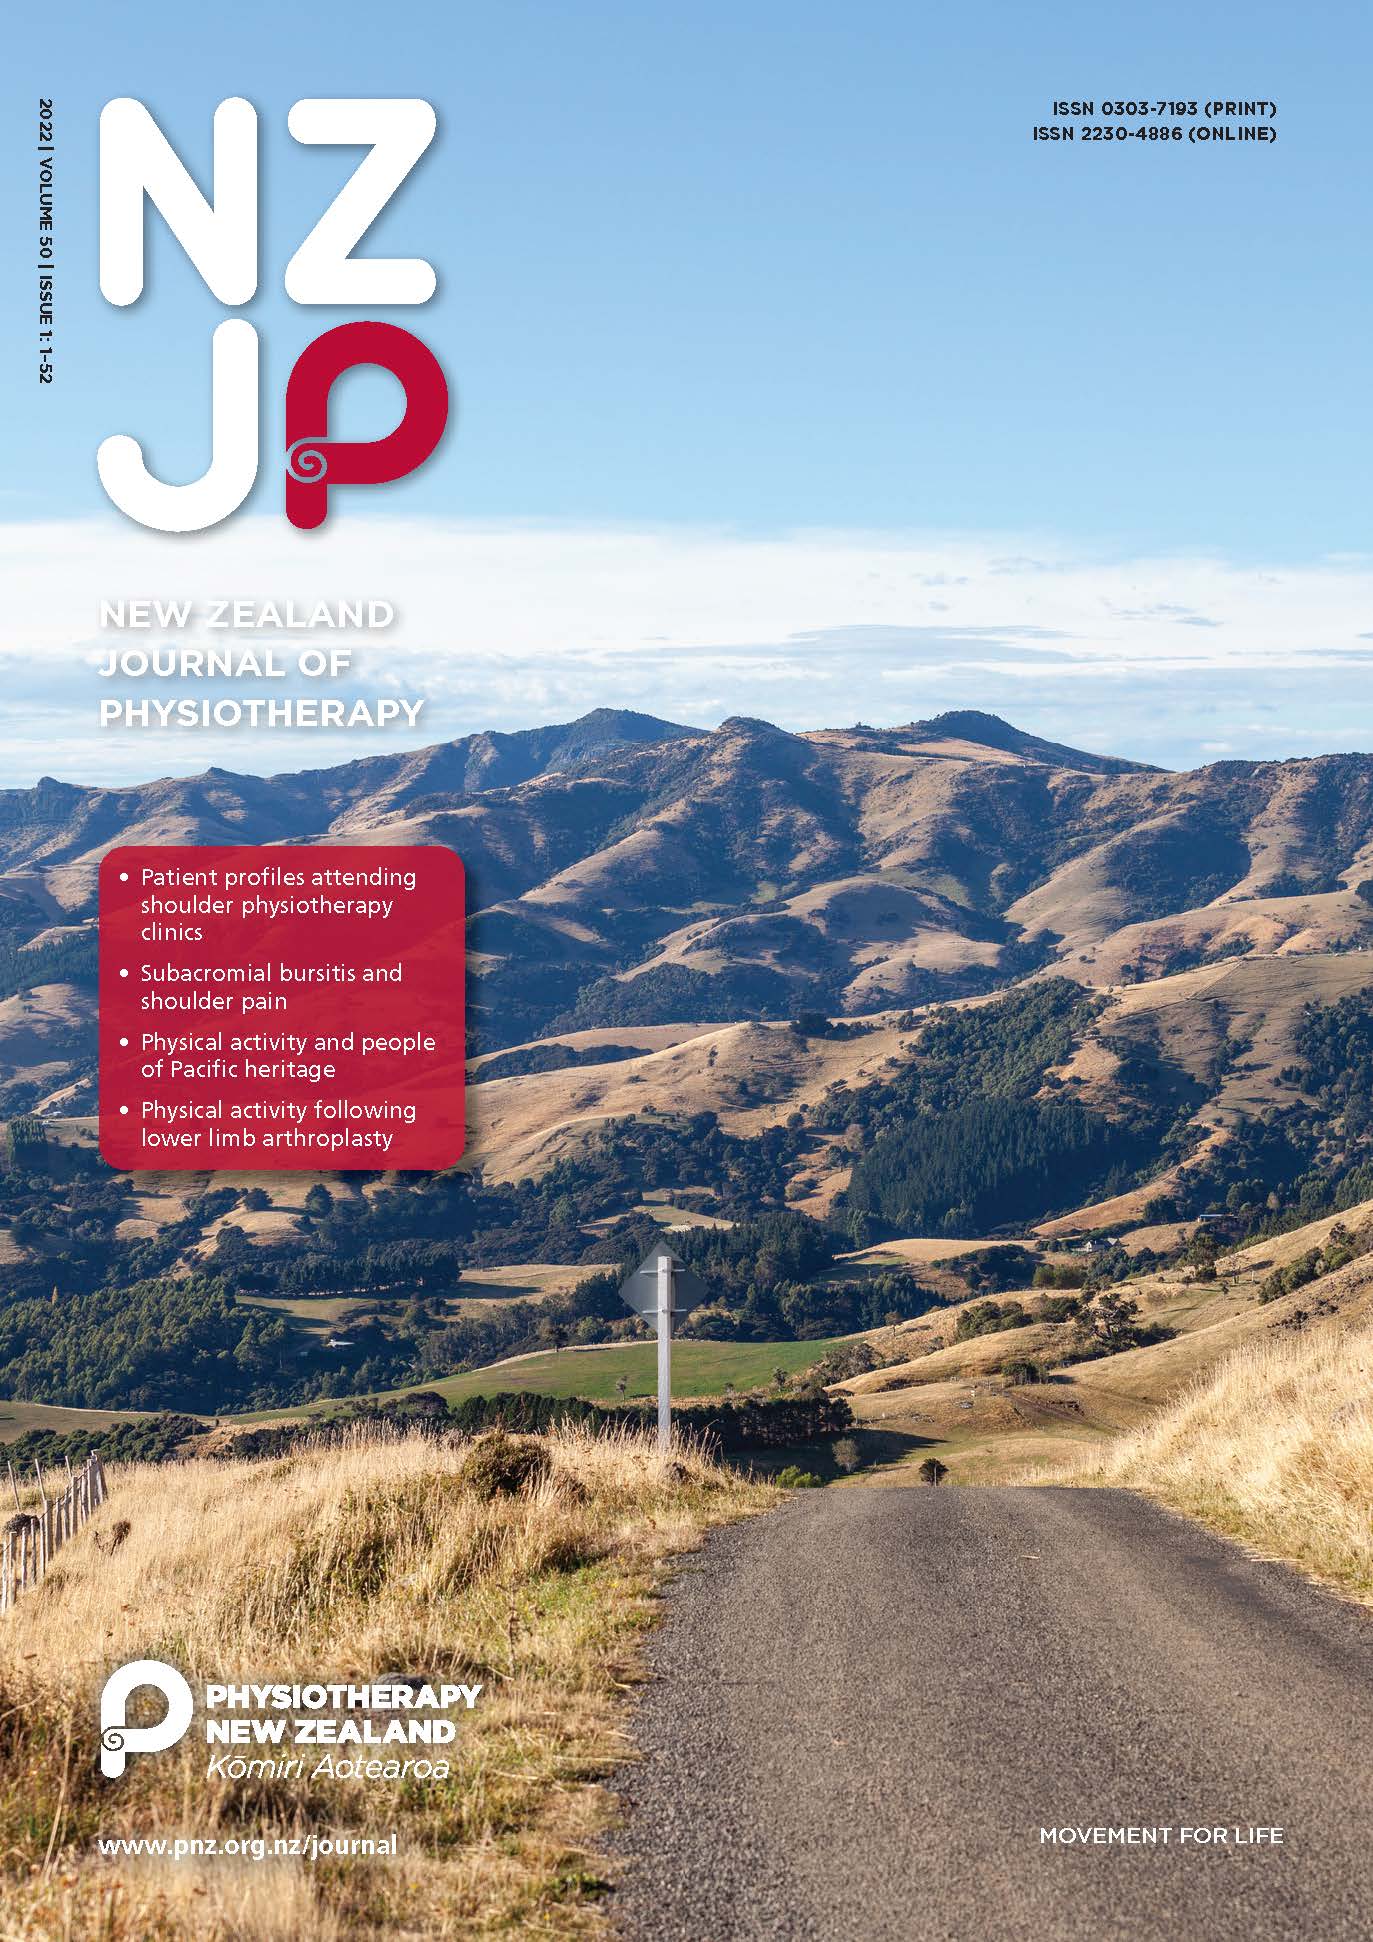 					View Vol. 50 No. 1 (2022): New Zealand Journal of Physiotherapy
				